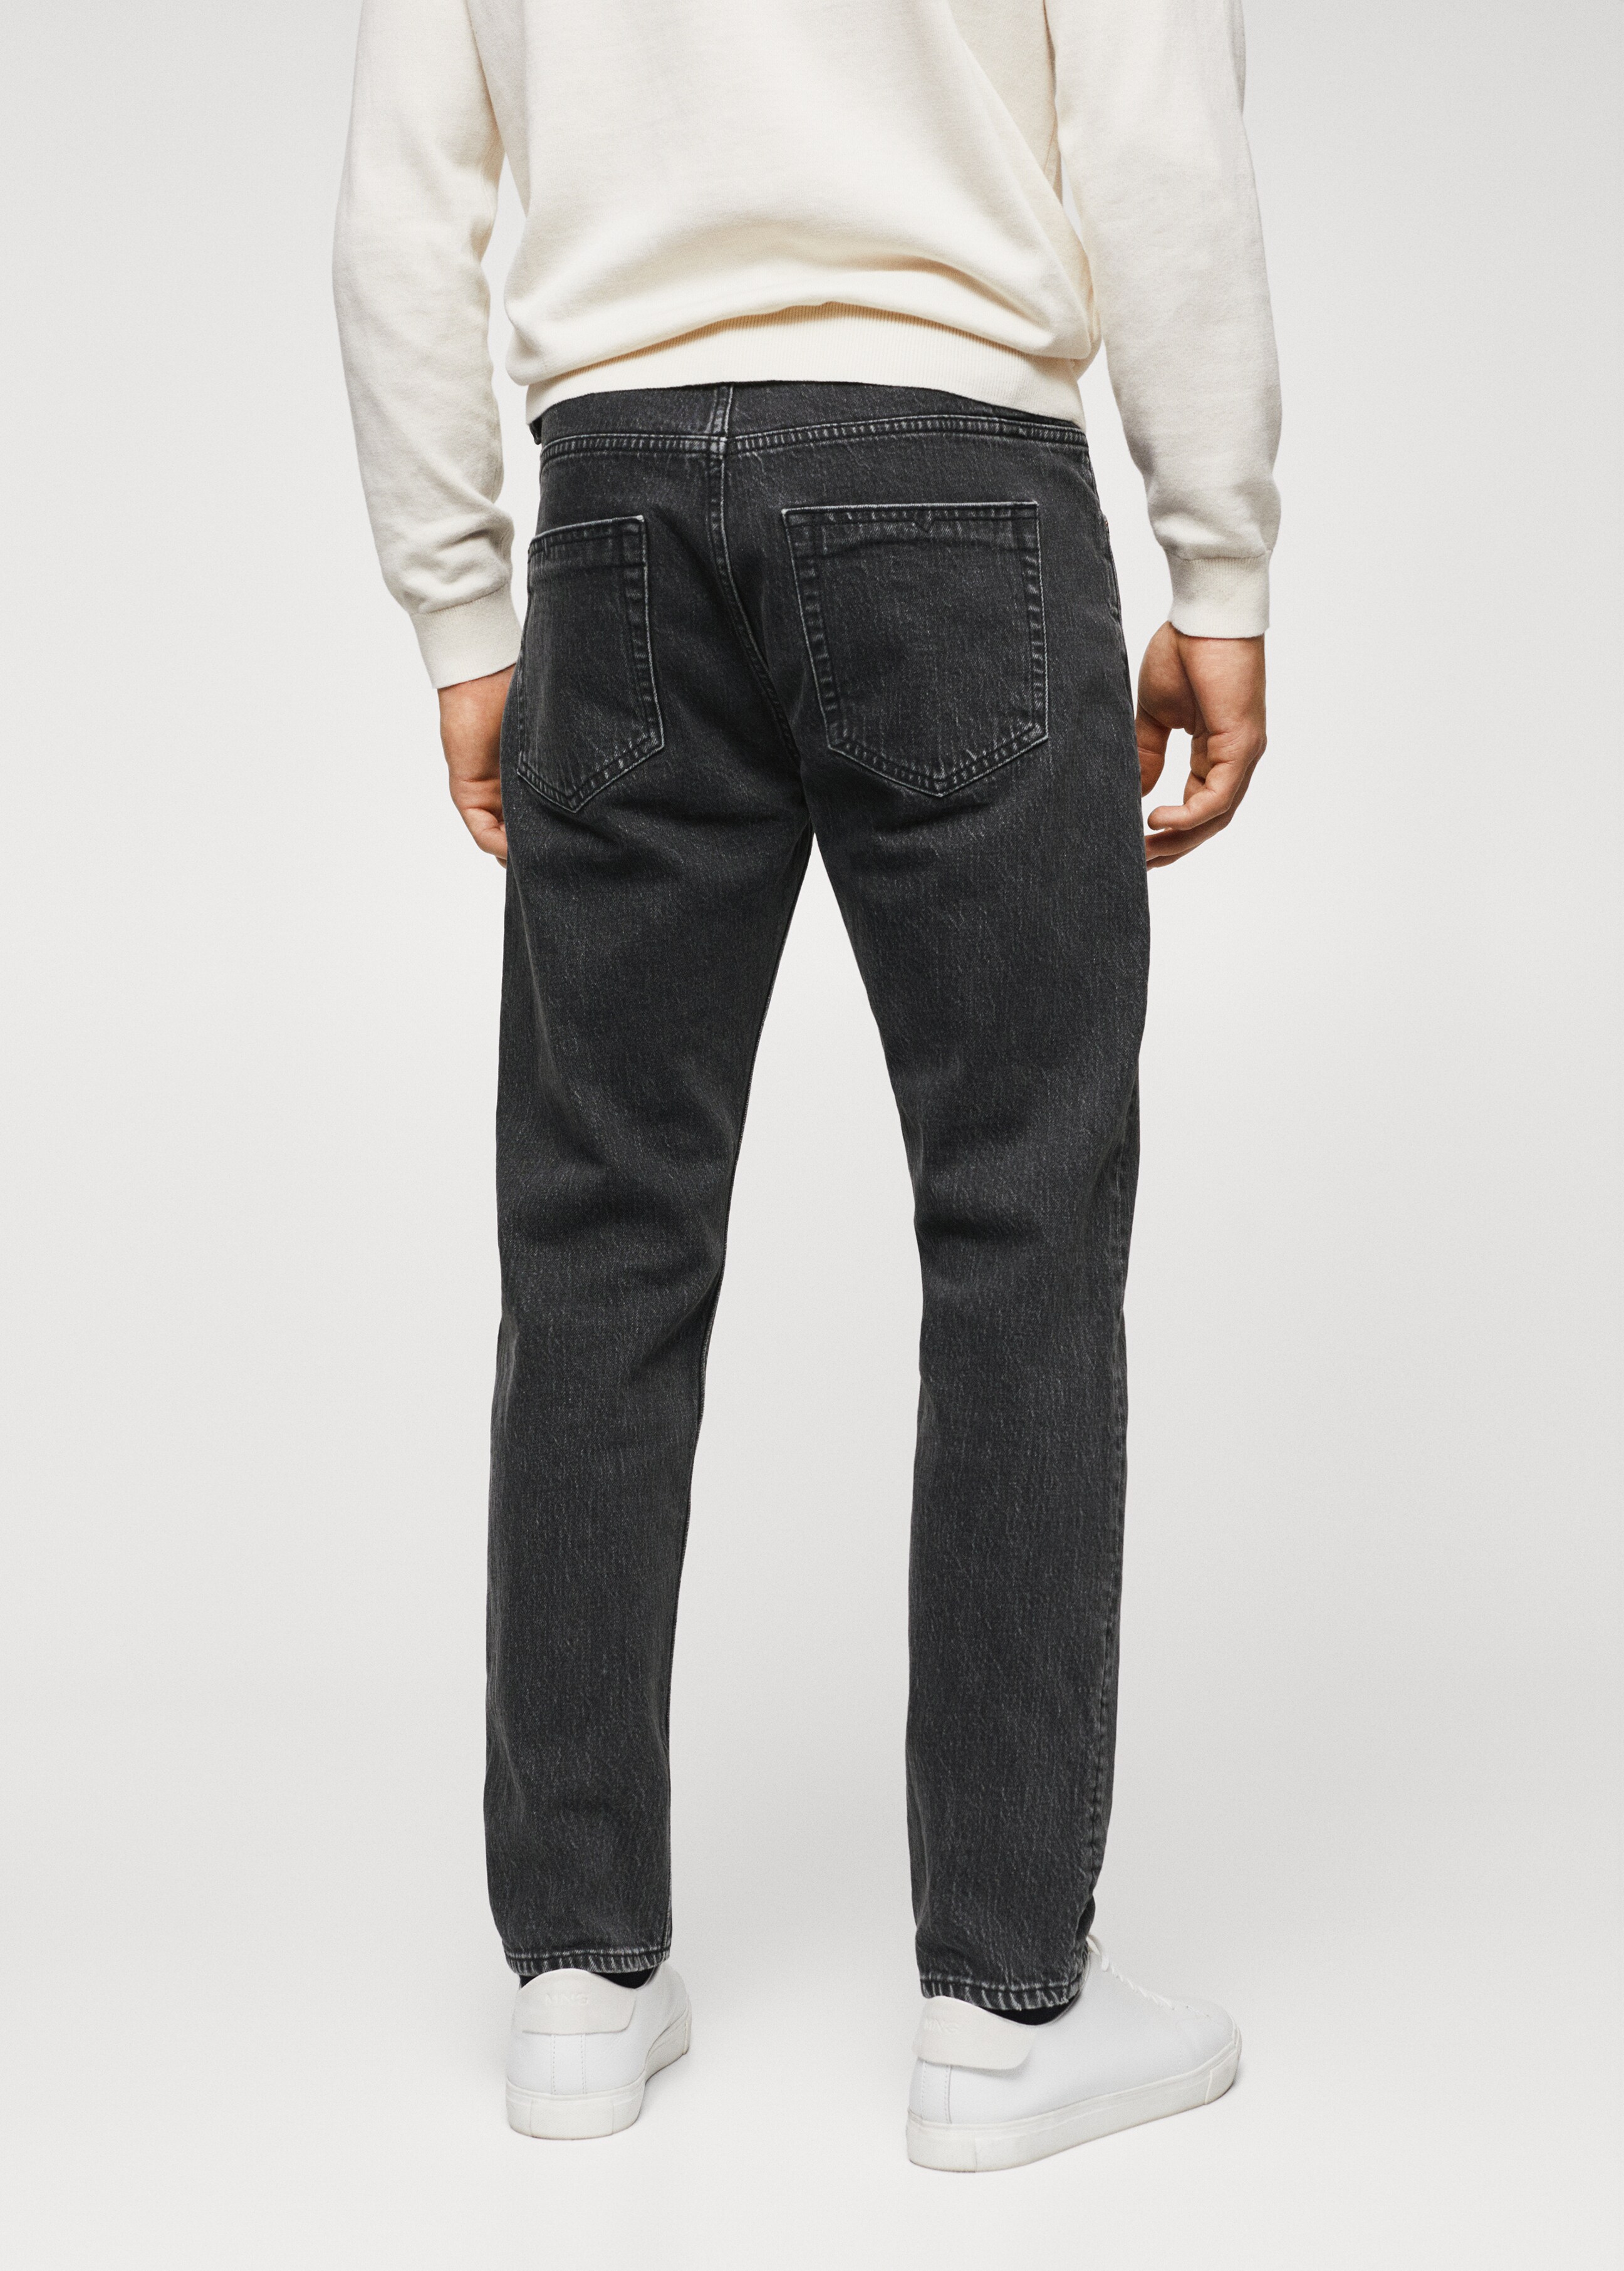 Jeans Ben tapered cropped - Reverso del artículo